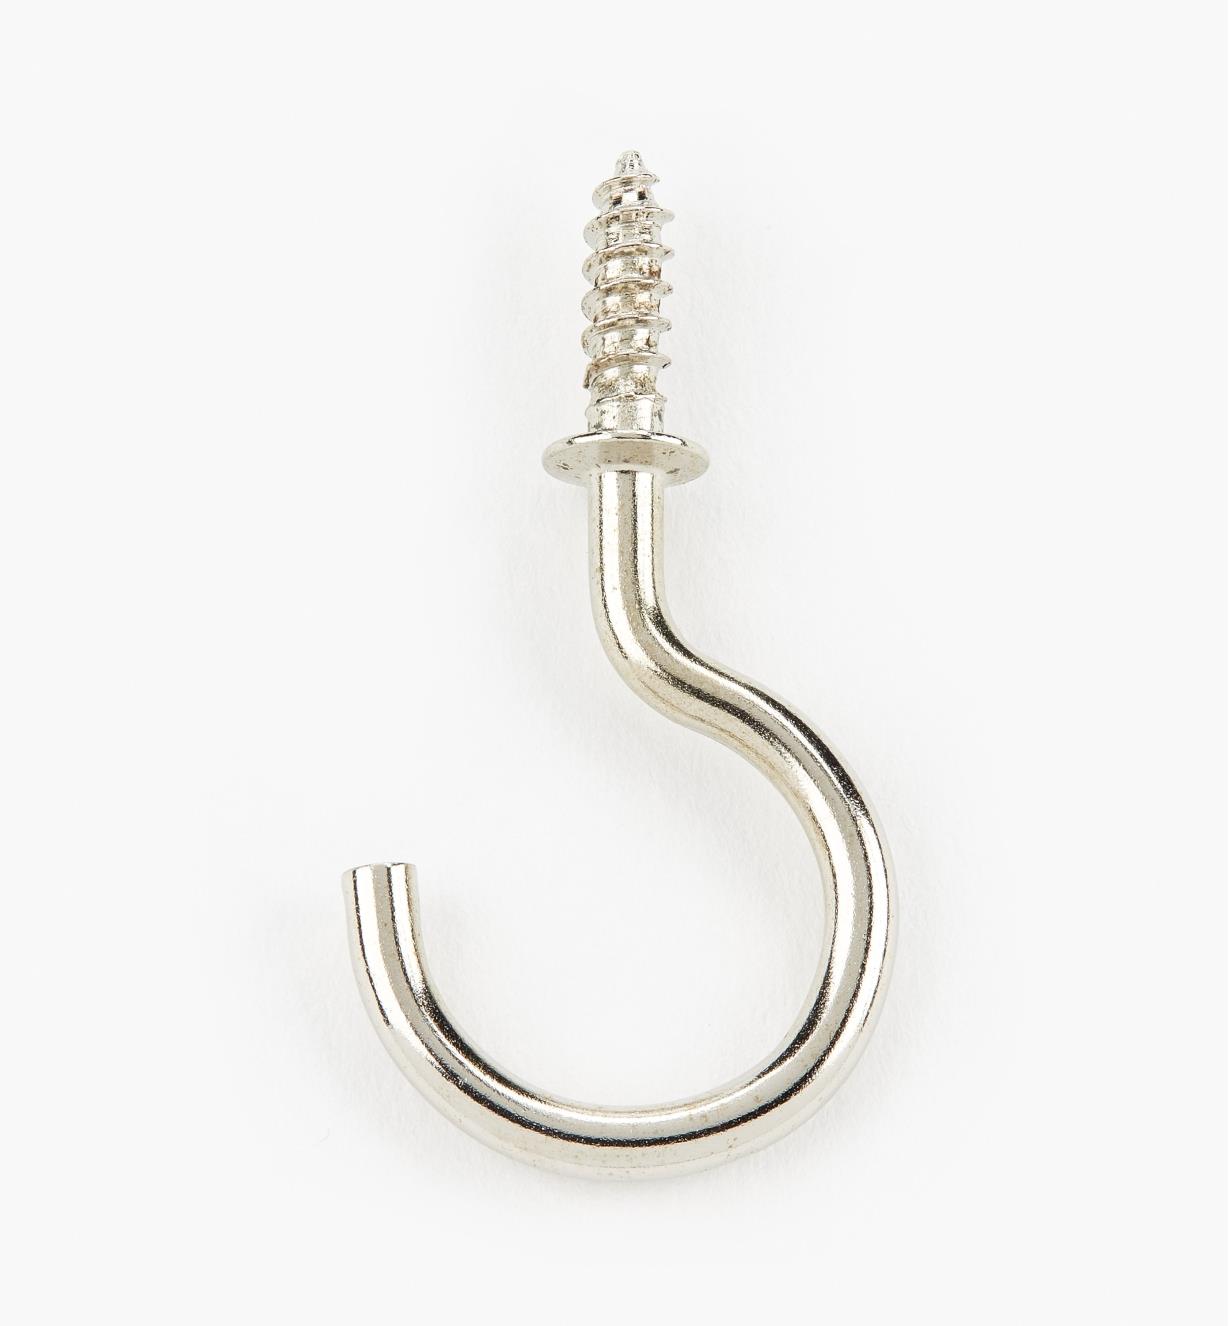 00S5633 - 1" Nickel-Plated Cup Hooks (100)